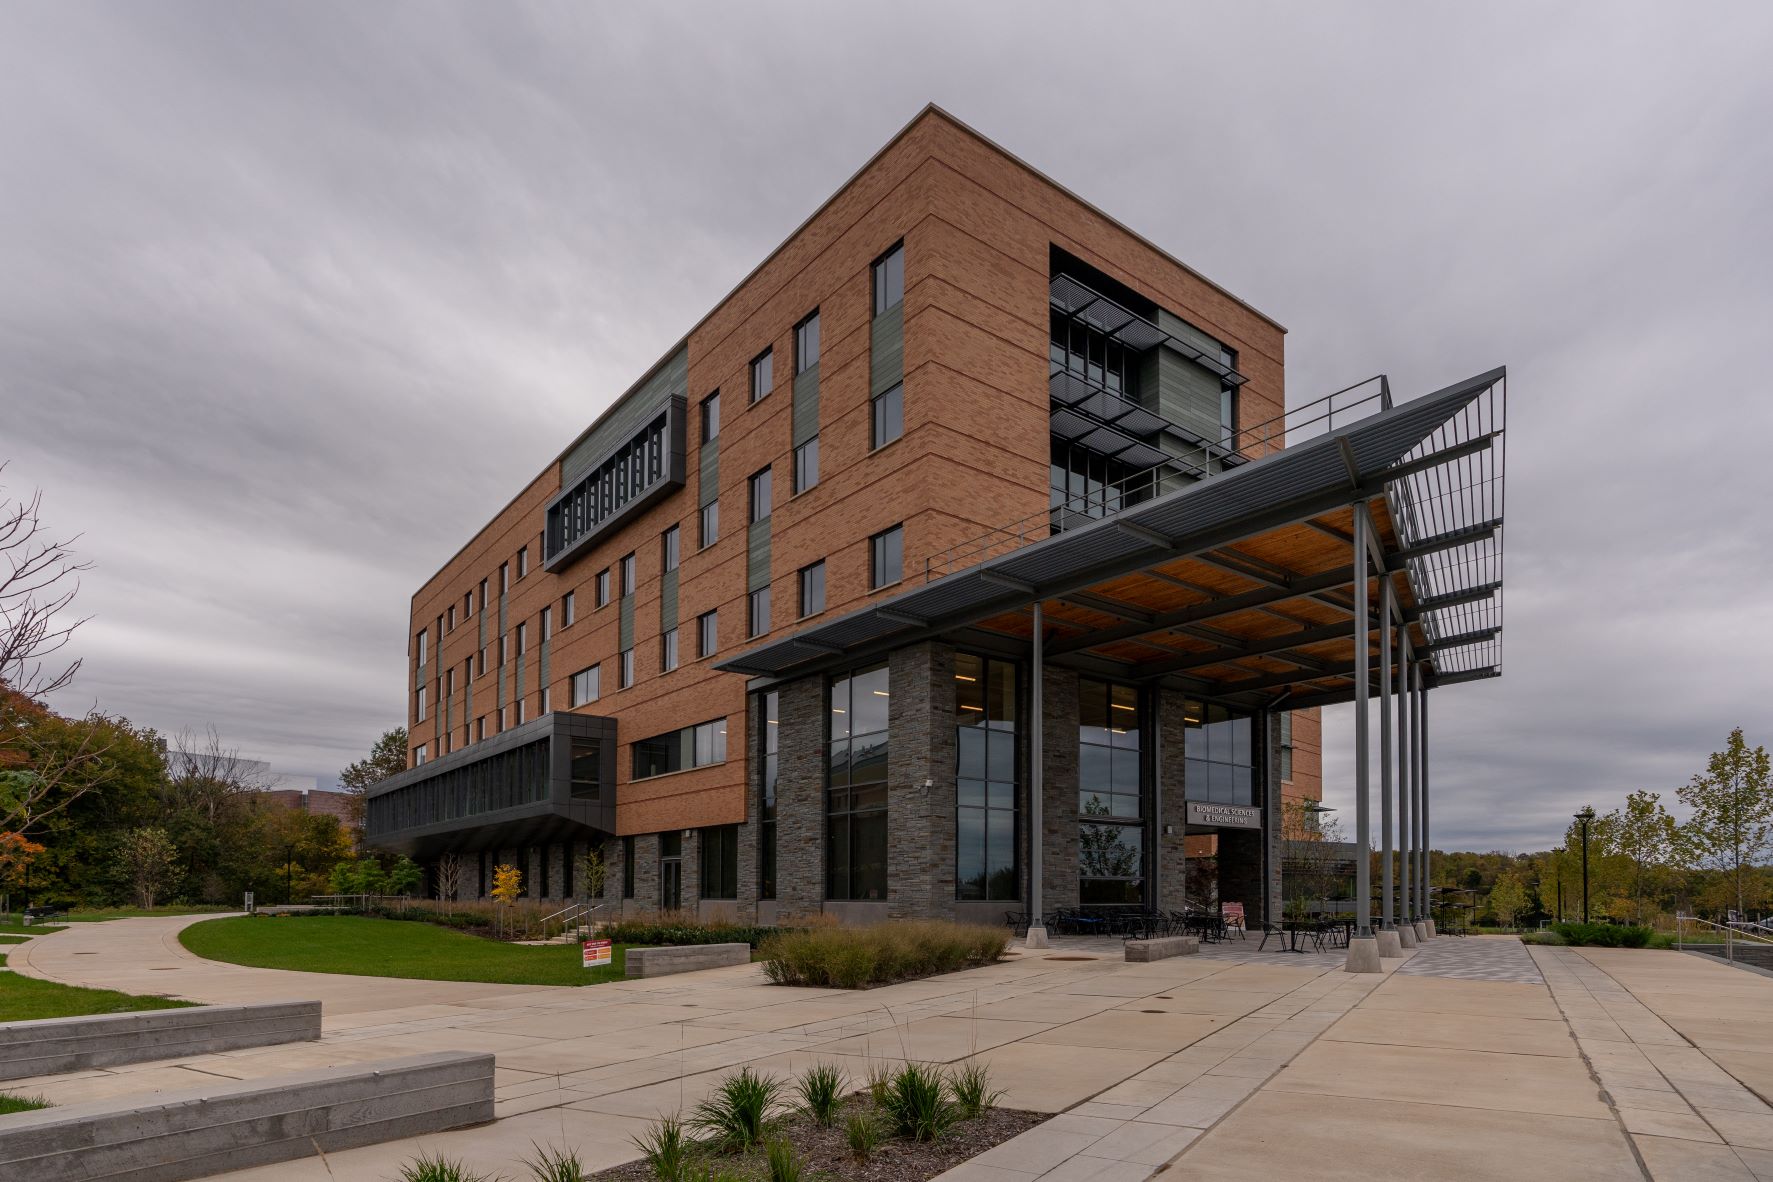 The Biomedical Sciences and Engineering Building